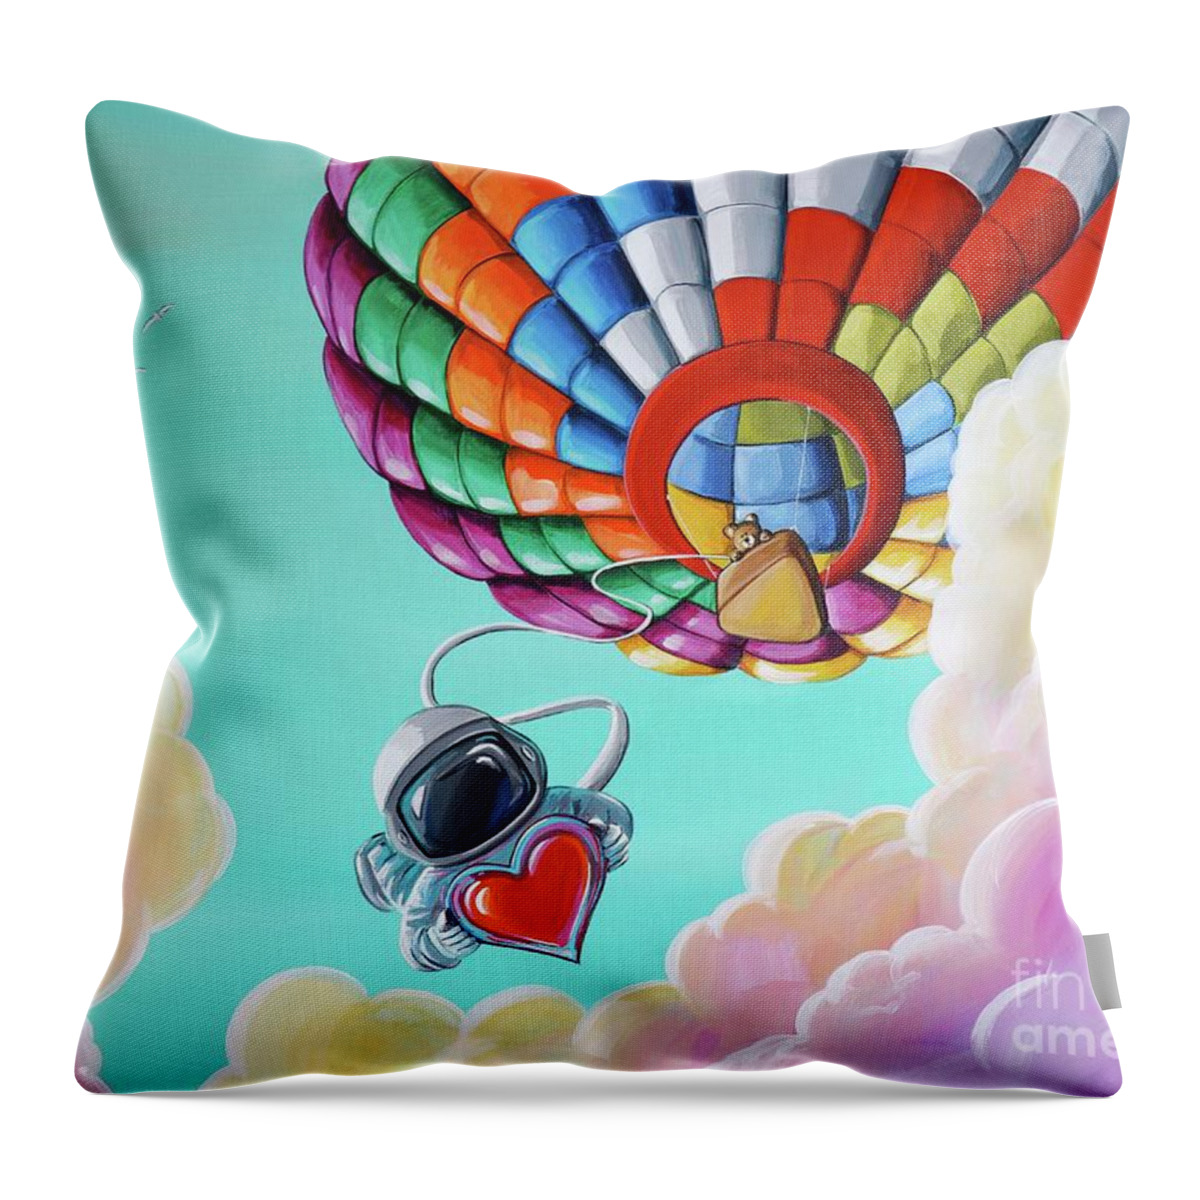 Hot Air Balloon Throw Pillow featuring the painting Love From Above by Cindy Thornton